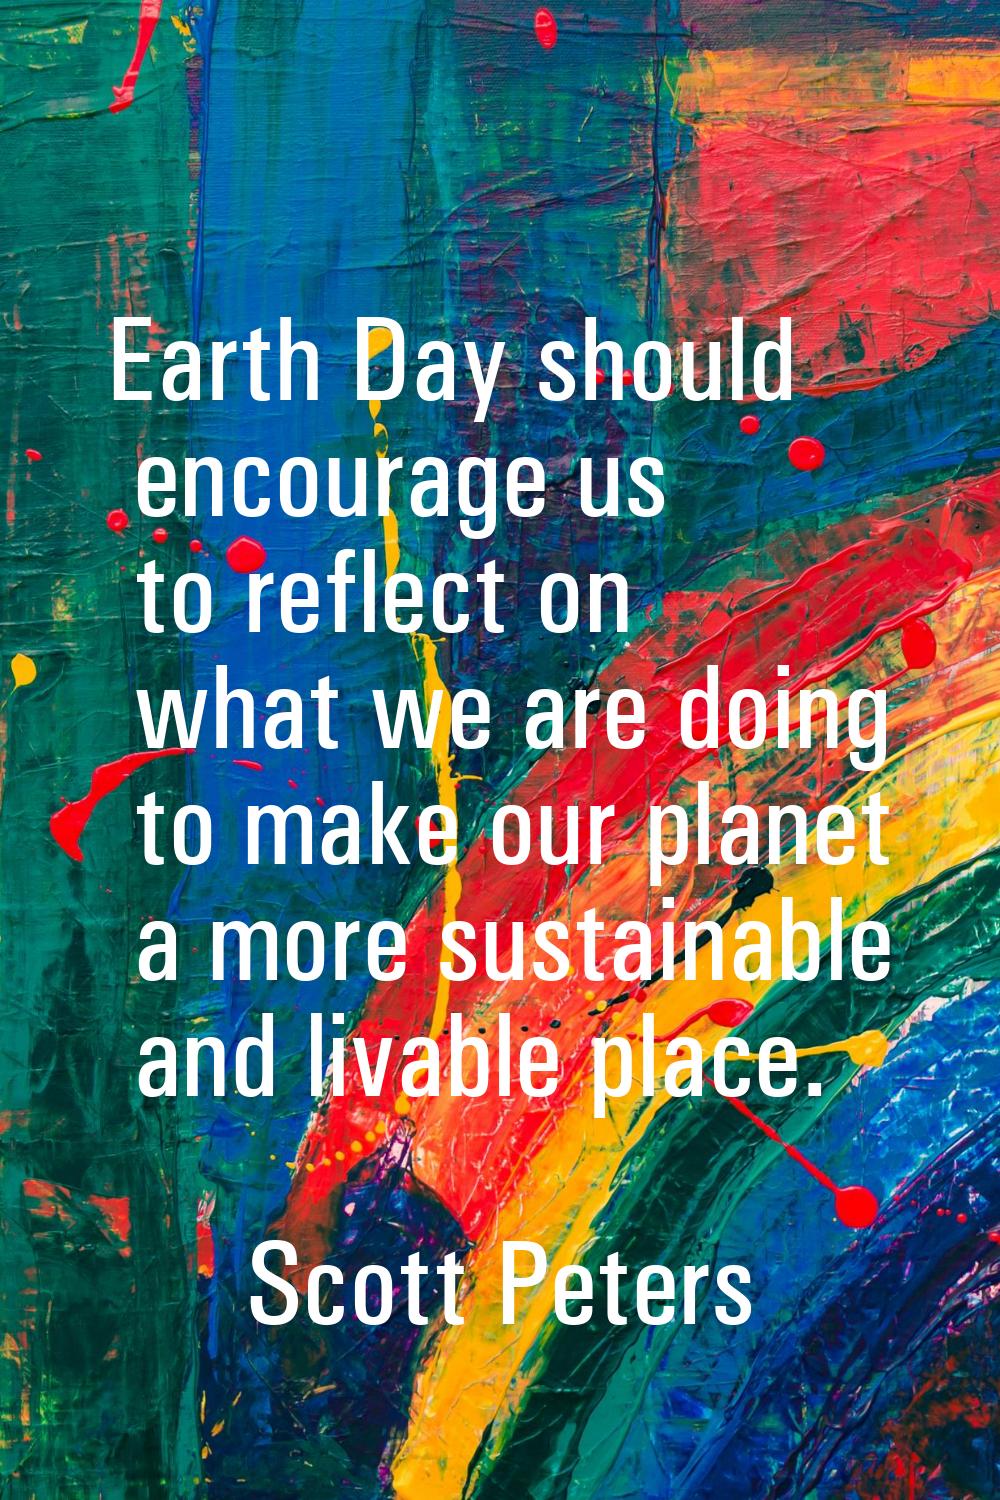 Earth Day should encourage us to reflect on what we are doing to make our planet a more sustainable